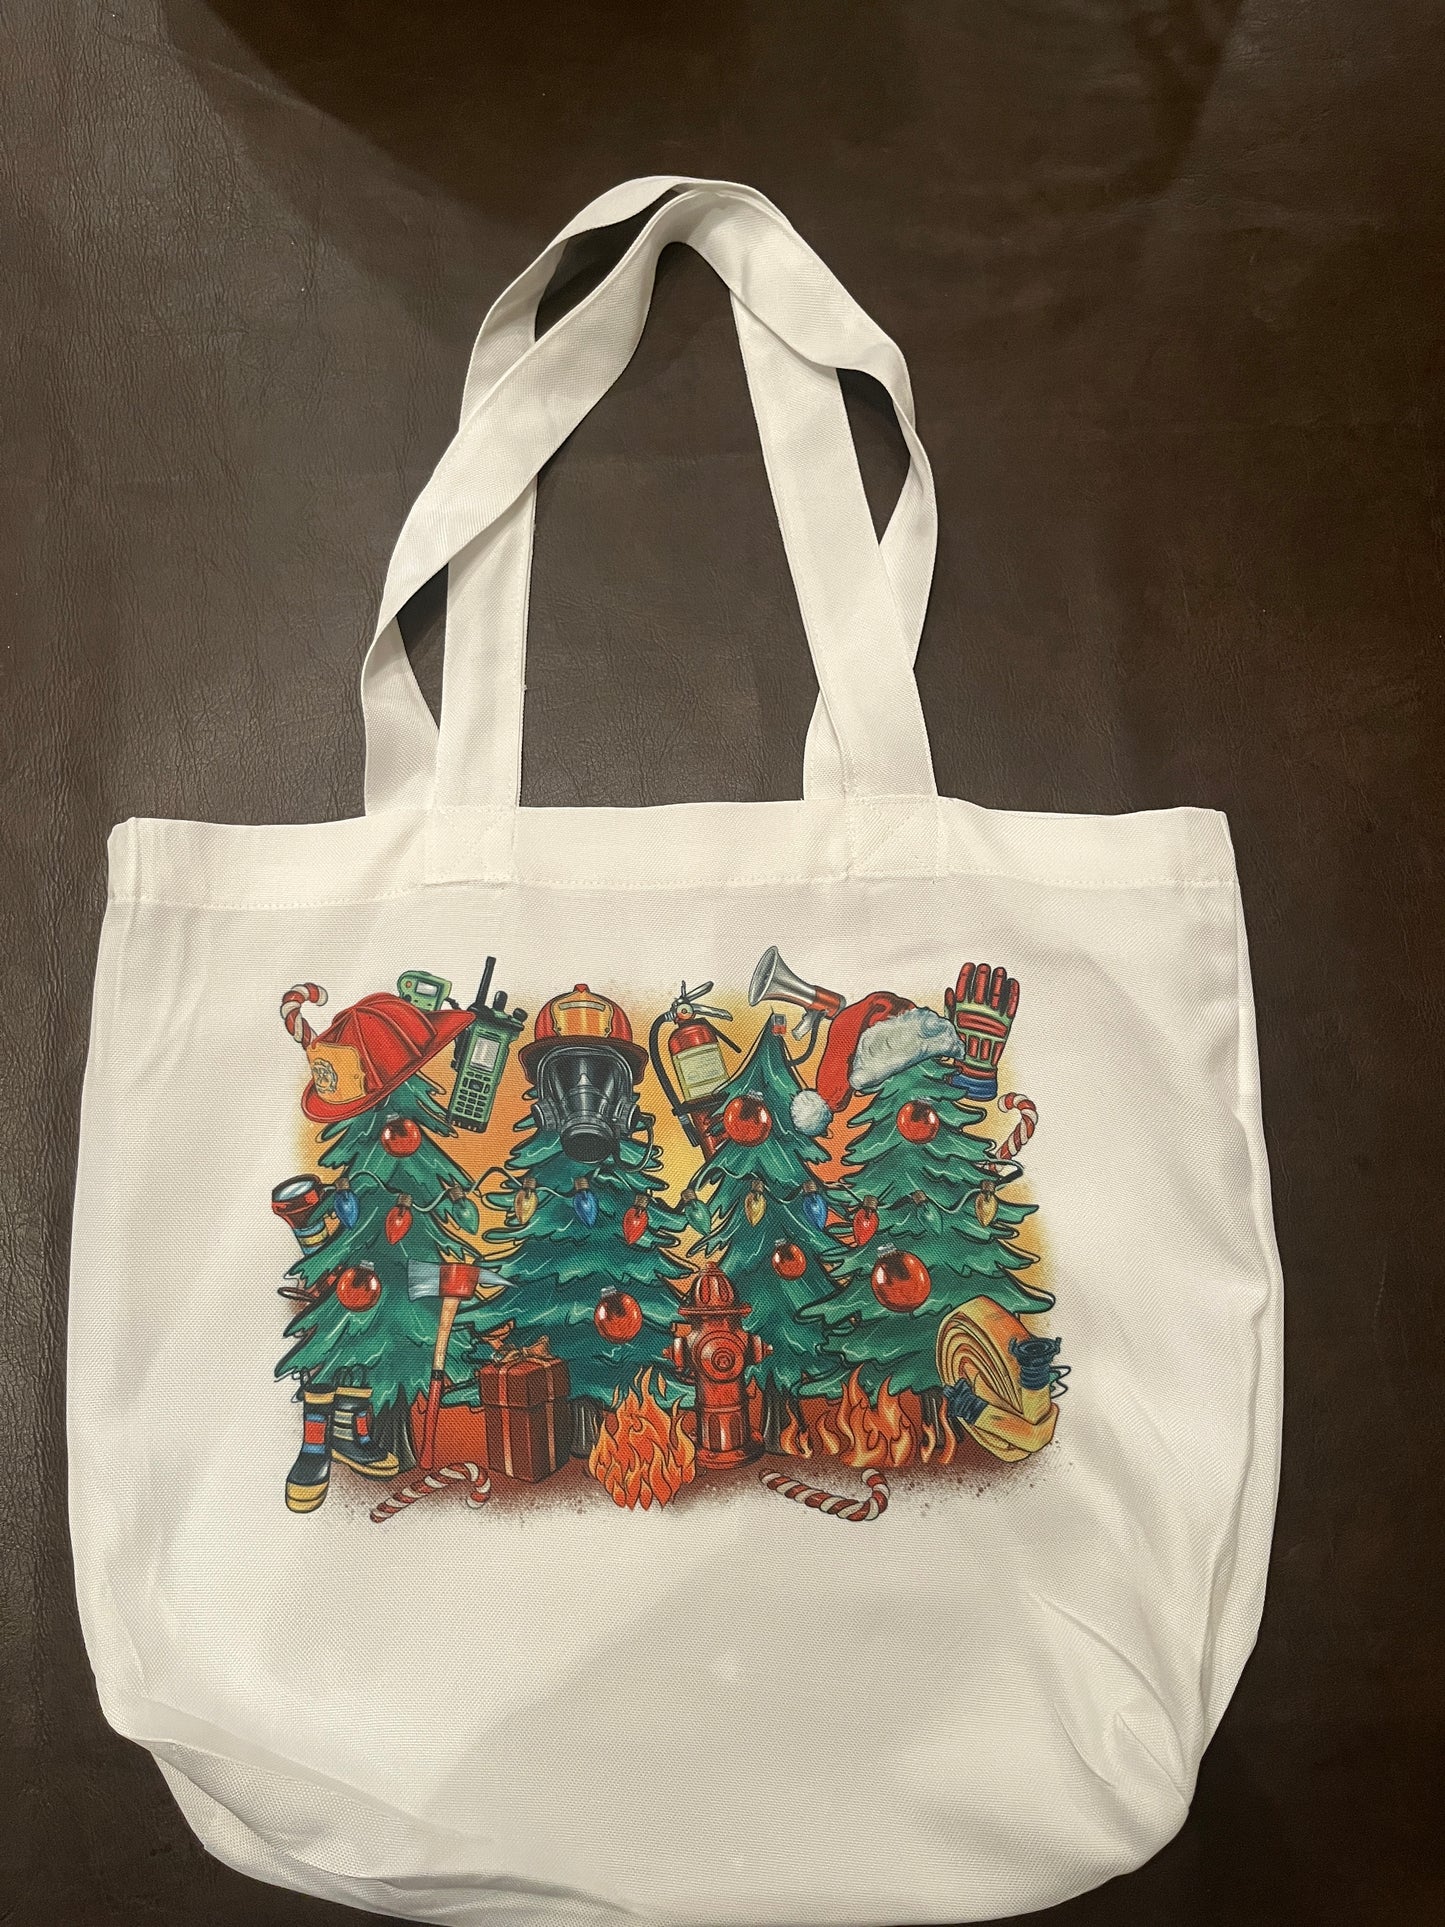 Firefighter Christmas Themed Tote Bag